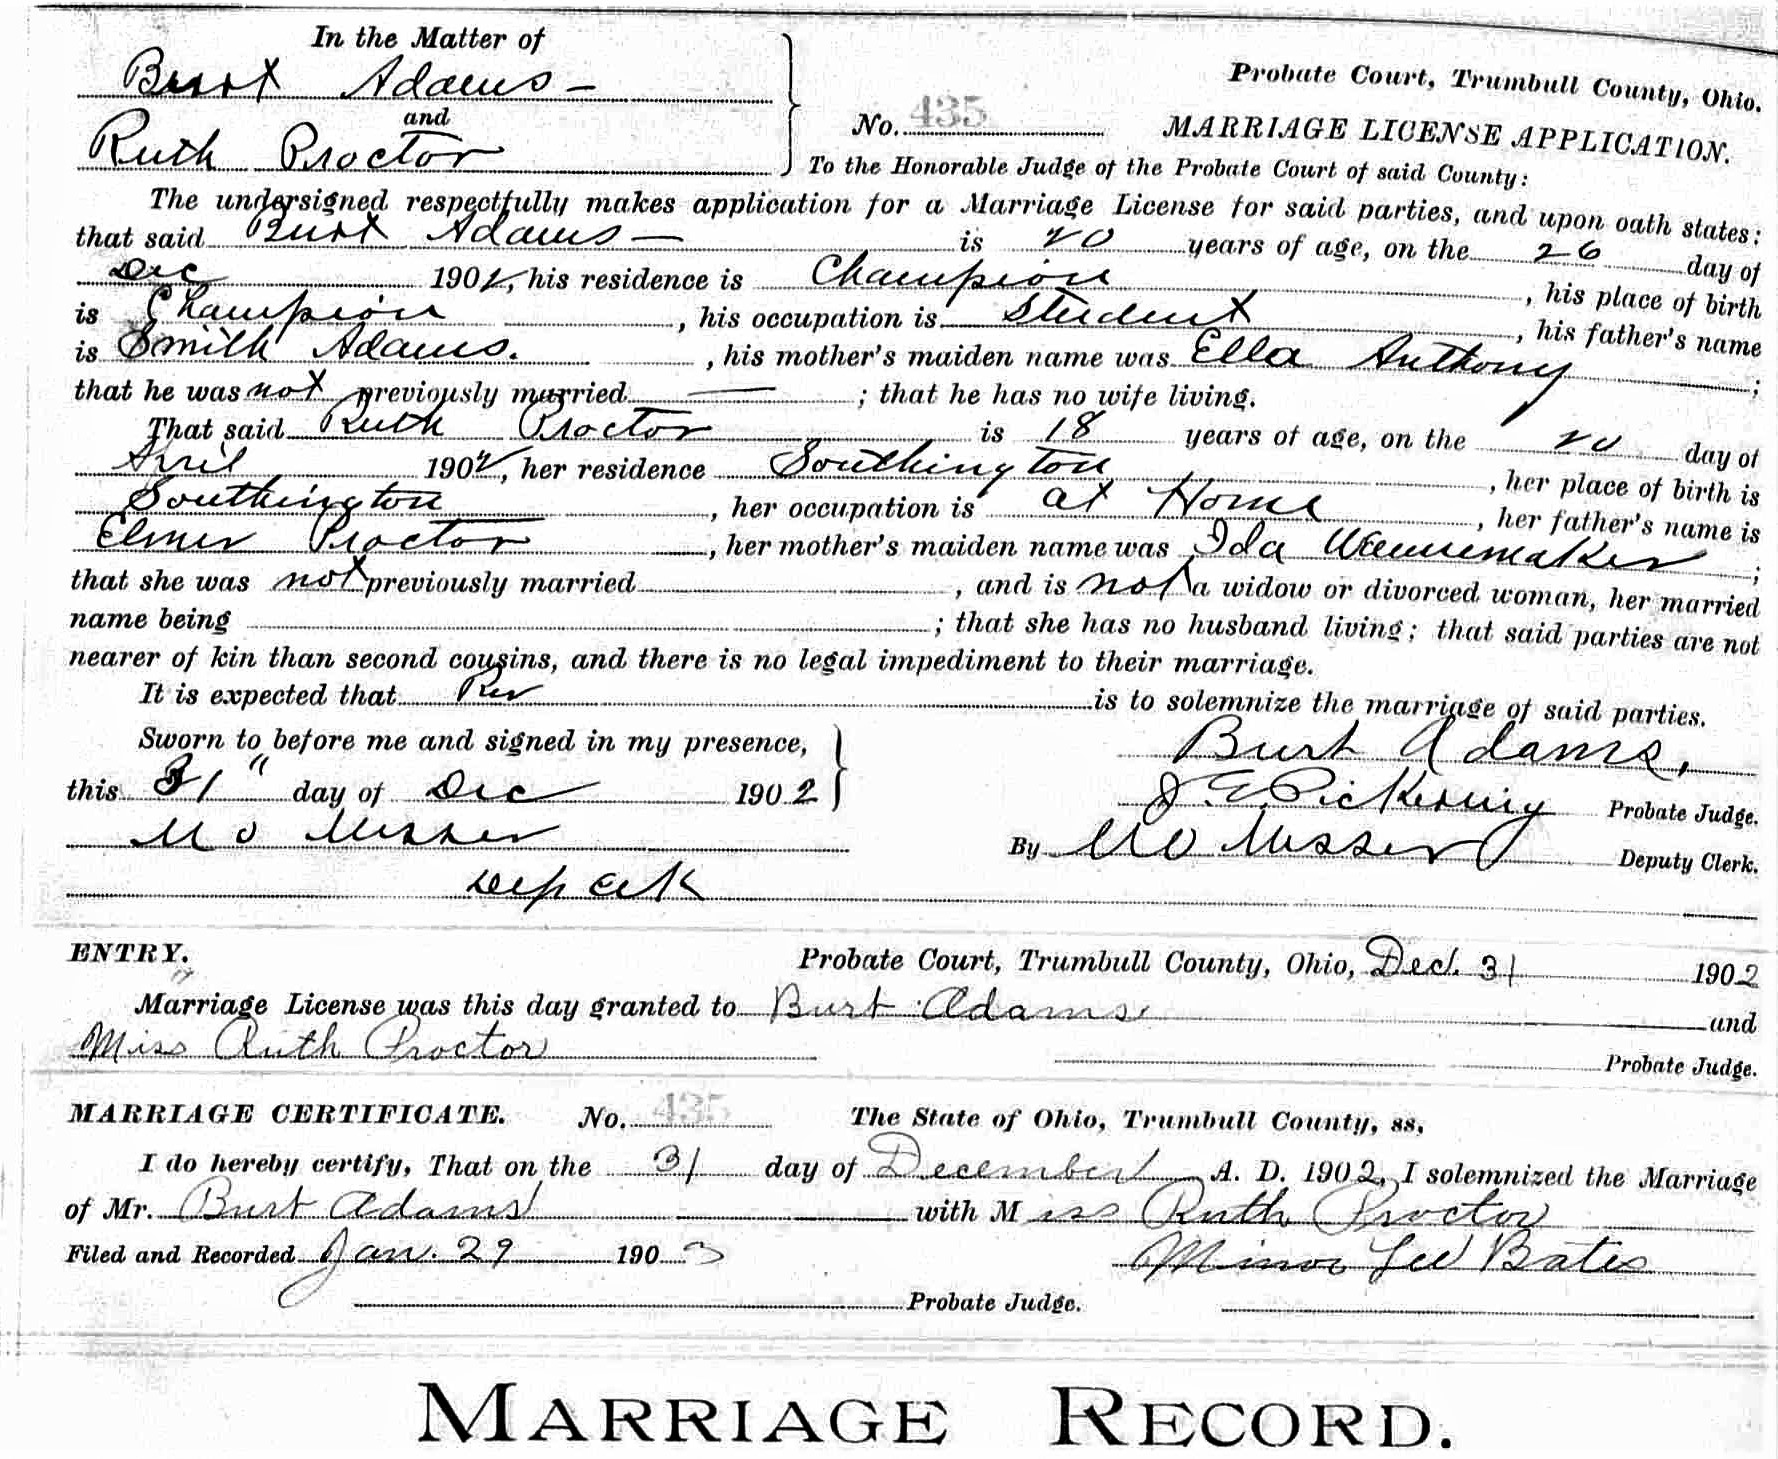 Ruth and Bert's marriage record